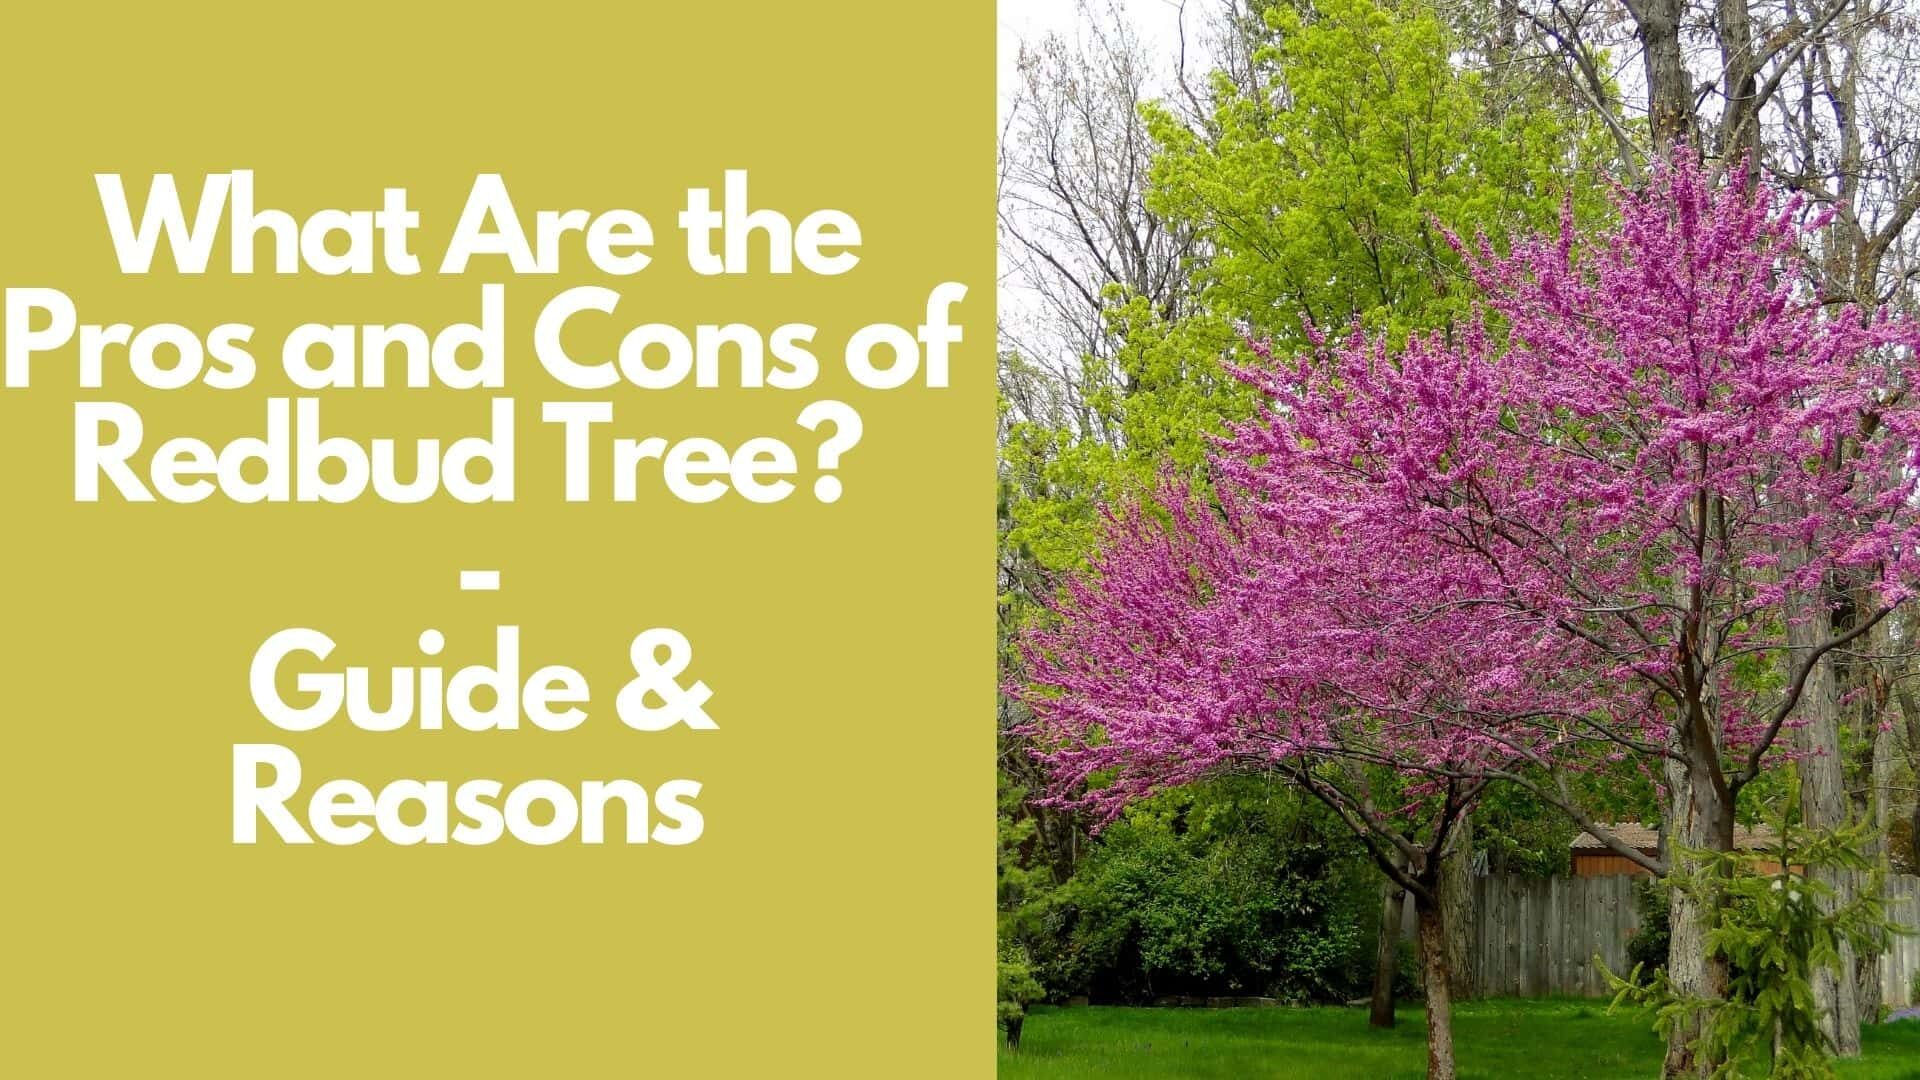 What Are the Pros and Cons of Redbud Tree? |Guide & Reasons  